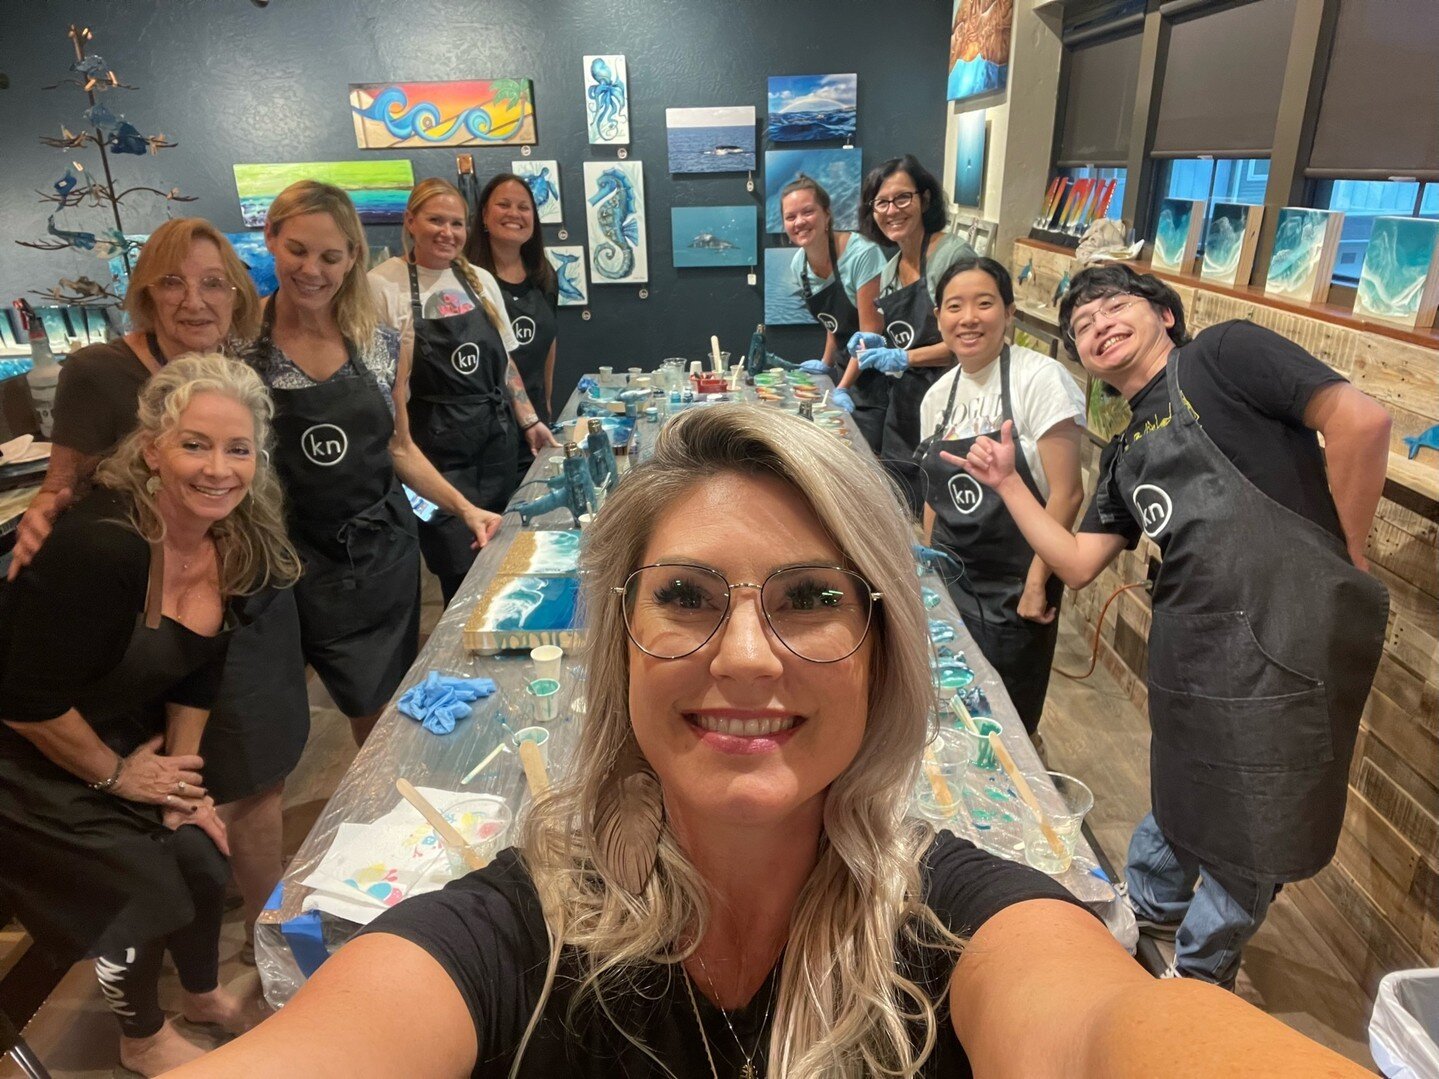 Want to stay in the cool air conditioning this weekend but still do something fun? Bring the beach to you by creating your own ocean landscape with epoxy resin artist Holly Weber (@Holly_Weber_Art). Sip+Spill for a great summer activity, away from th